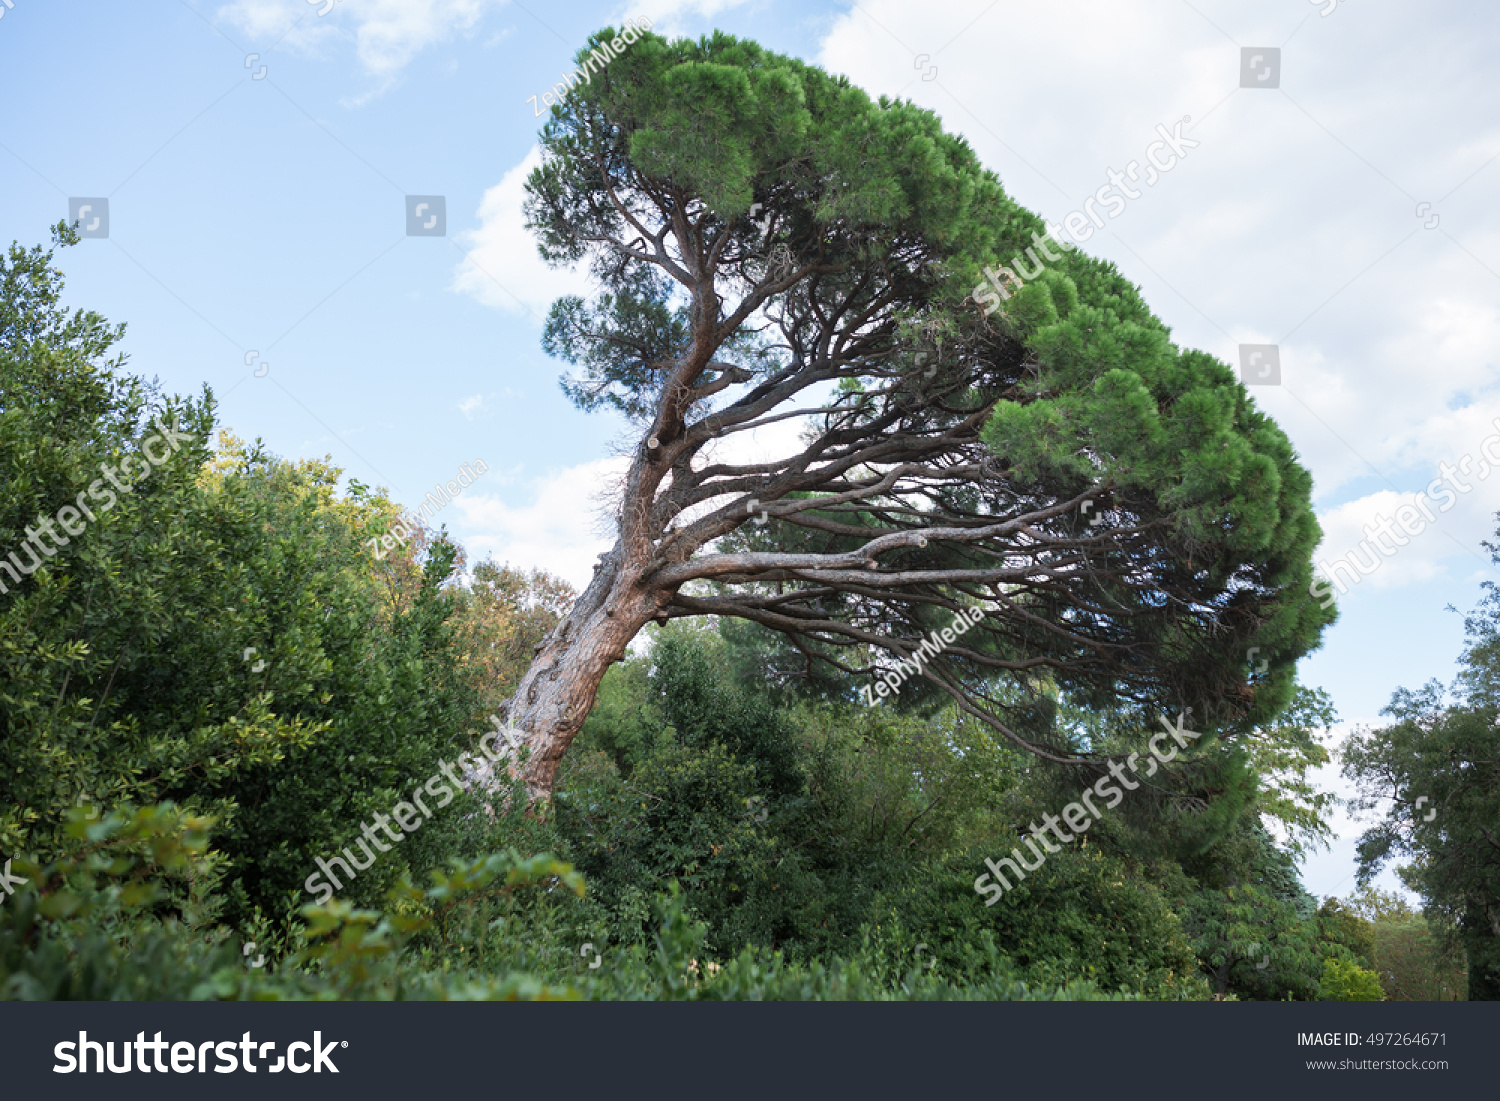 Maritime Pine on the hill on blue sky background. Detail of big beautiful maritime pine with trunk and green needles on blue clear sky #497264671